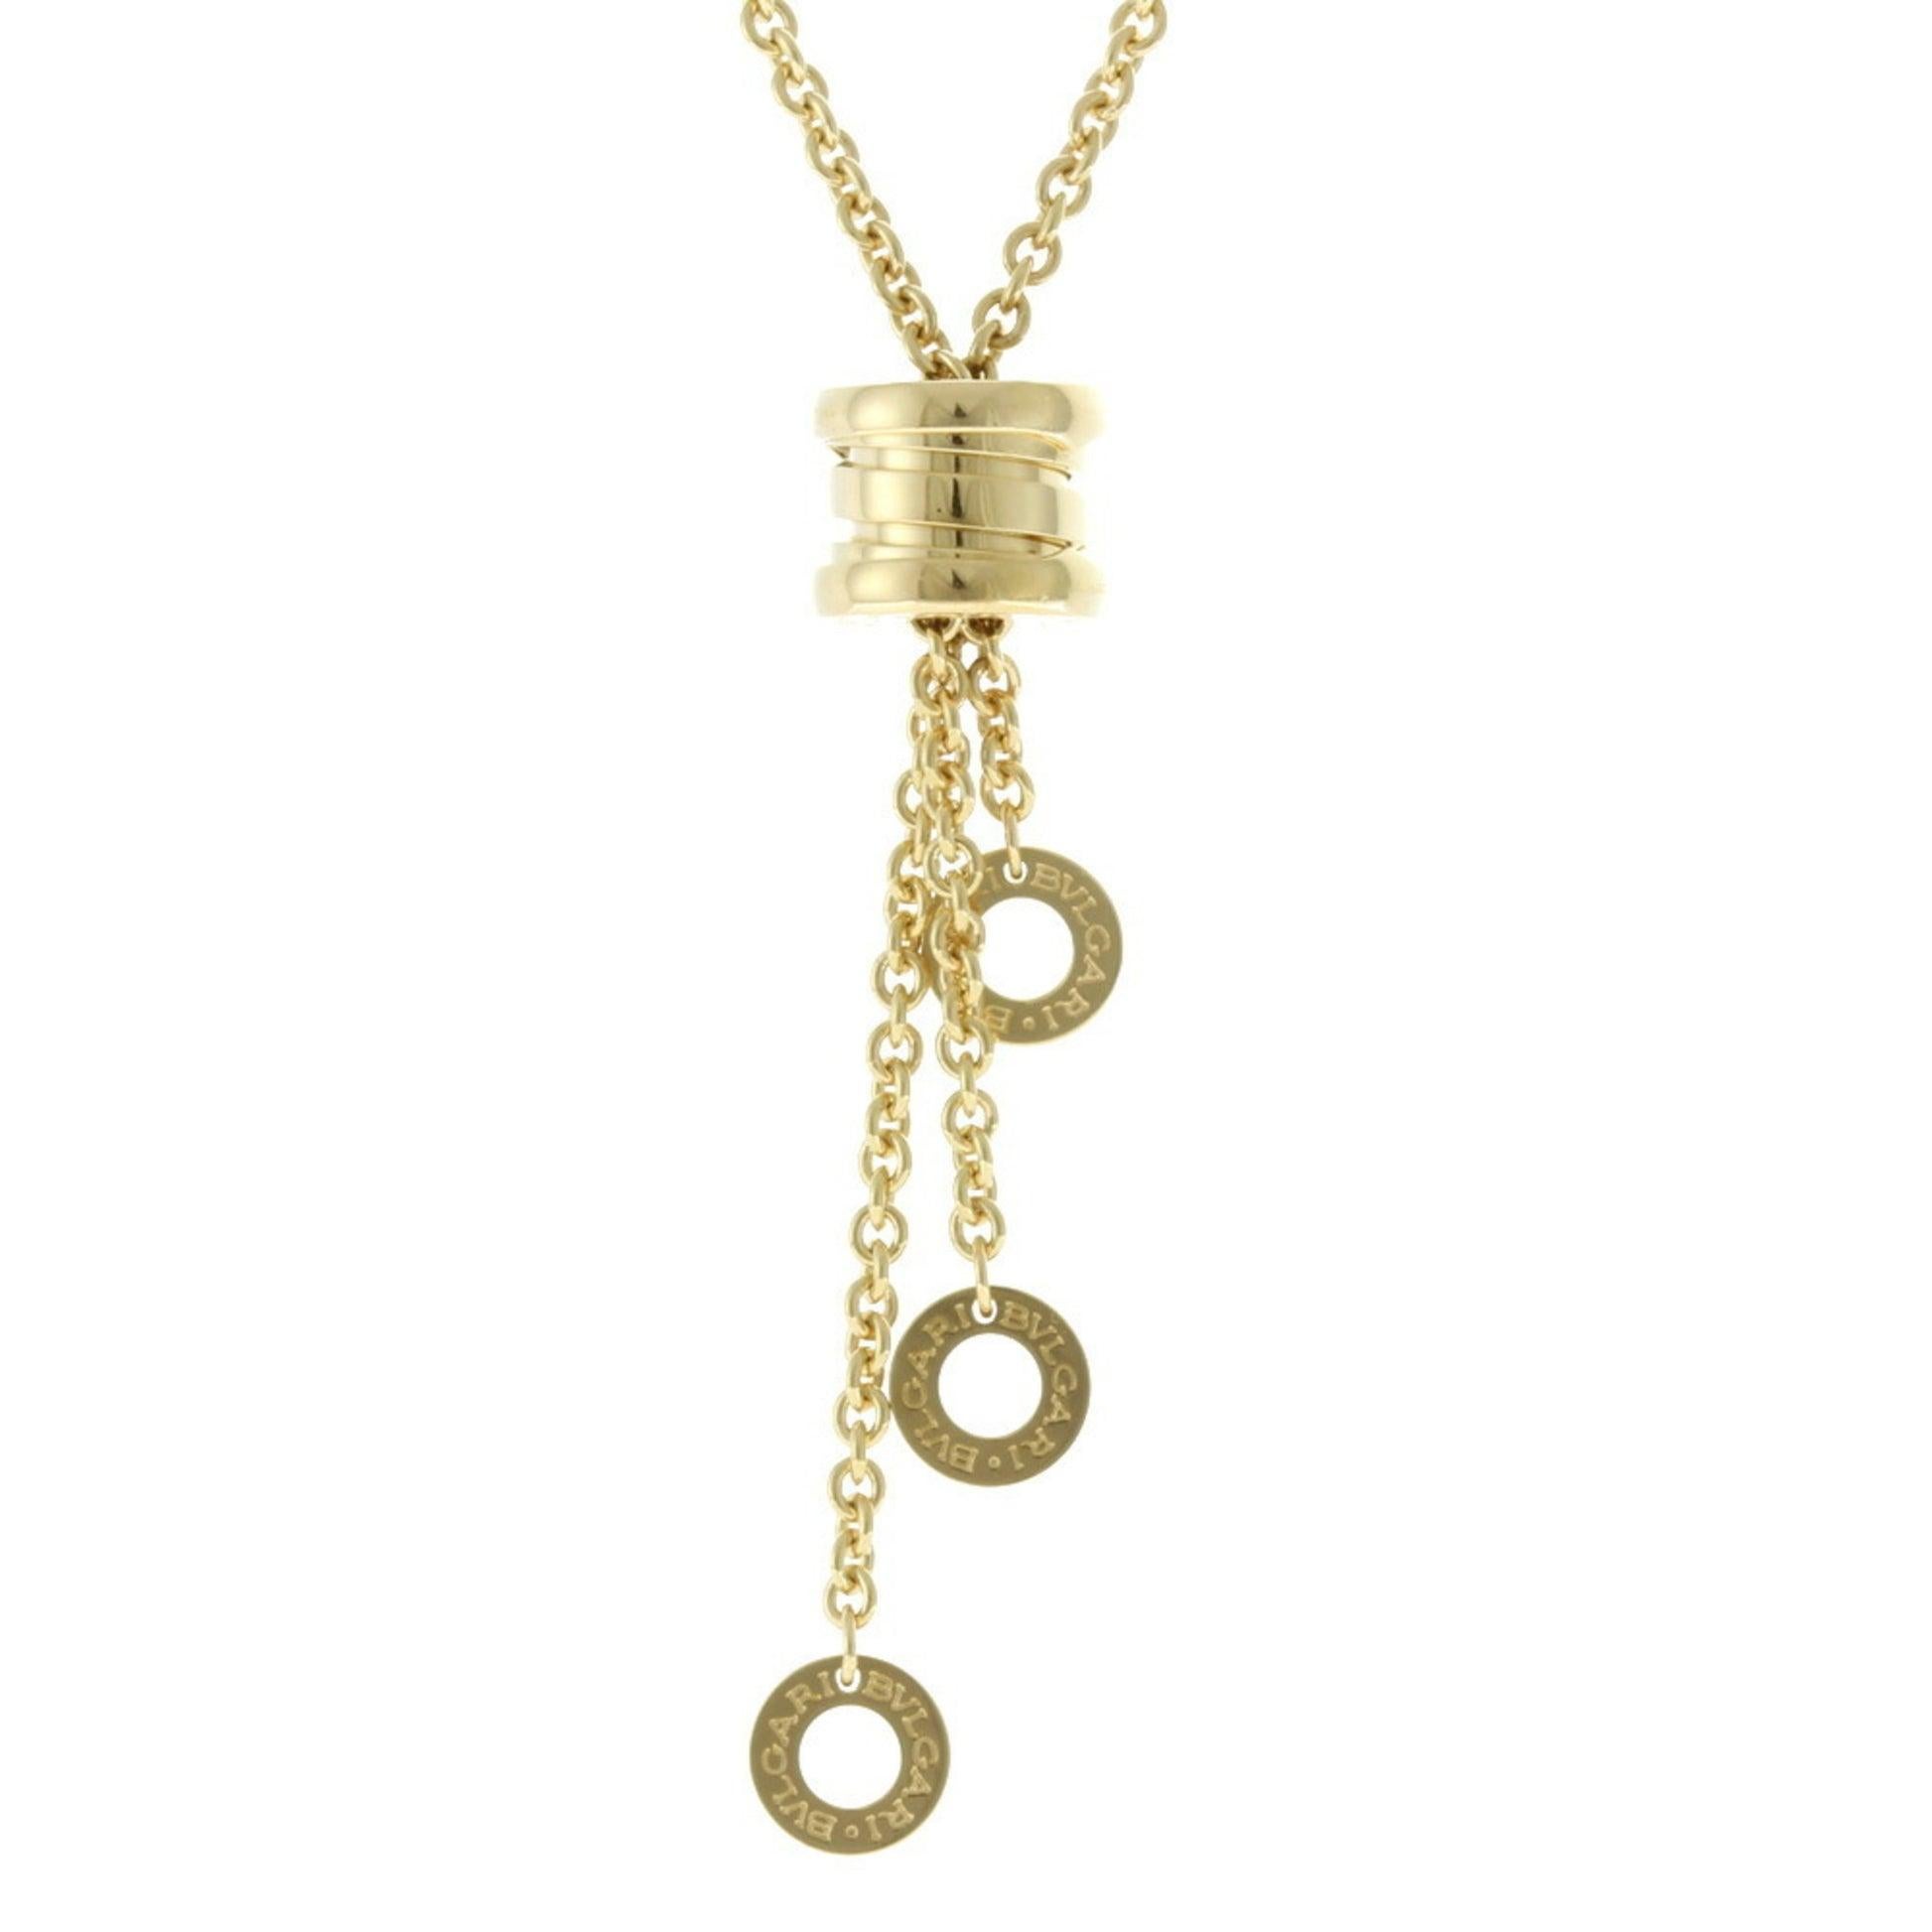 Bvlgari B-Zero.1 B Zero One Element Necklace in 18K Yellow Gold

Additional Information:
Brand: Bvlgari
Gender: Women
Line: B.zero1
Country of Origin: Italy
Material: Yellow gold (18K)
Condition details: This item has been used and may have some